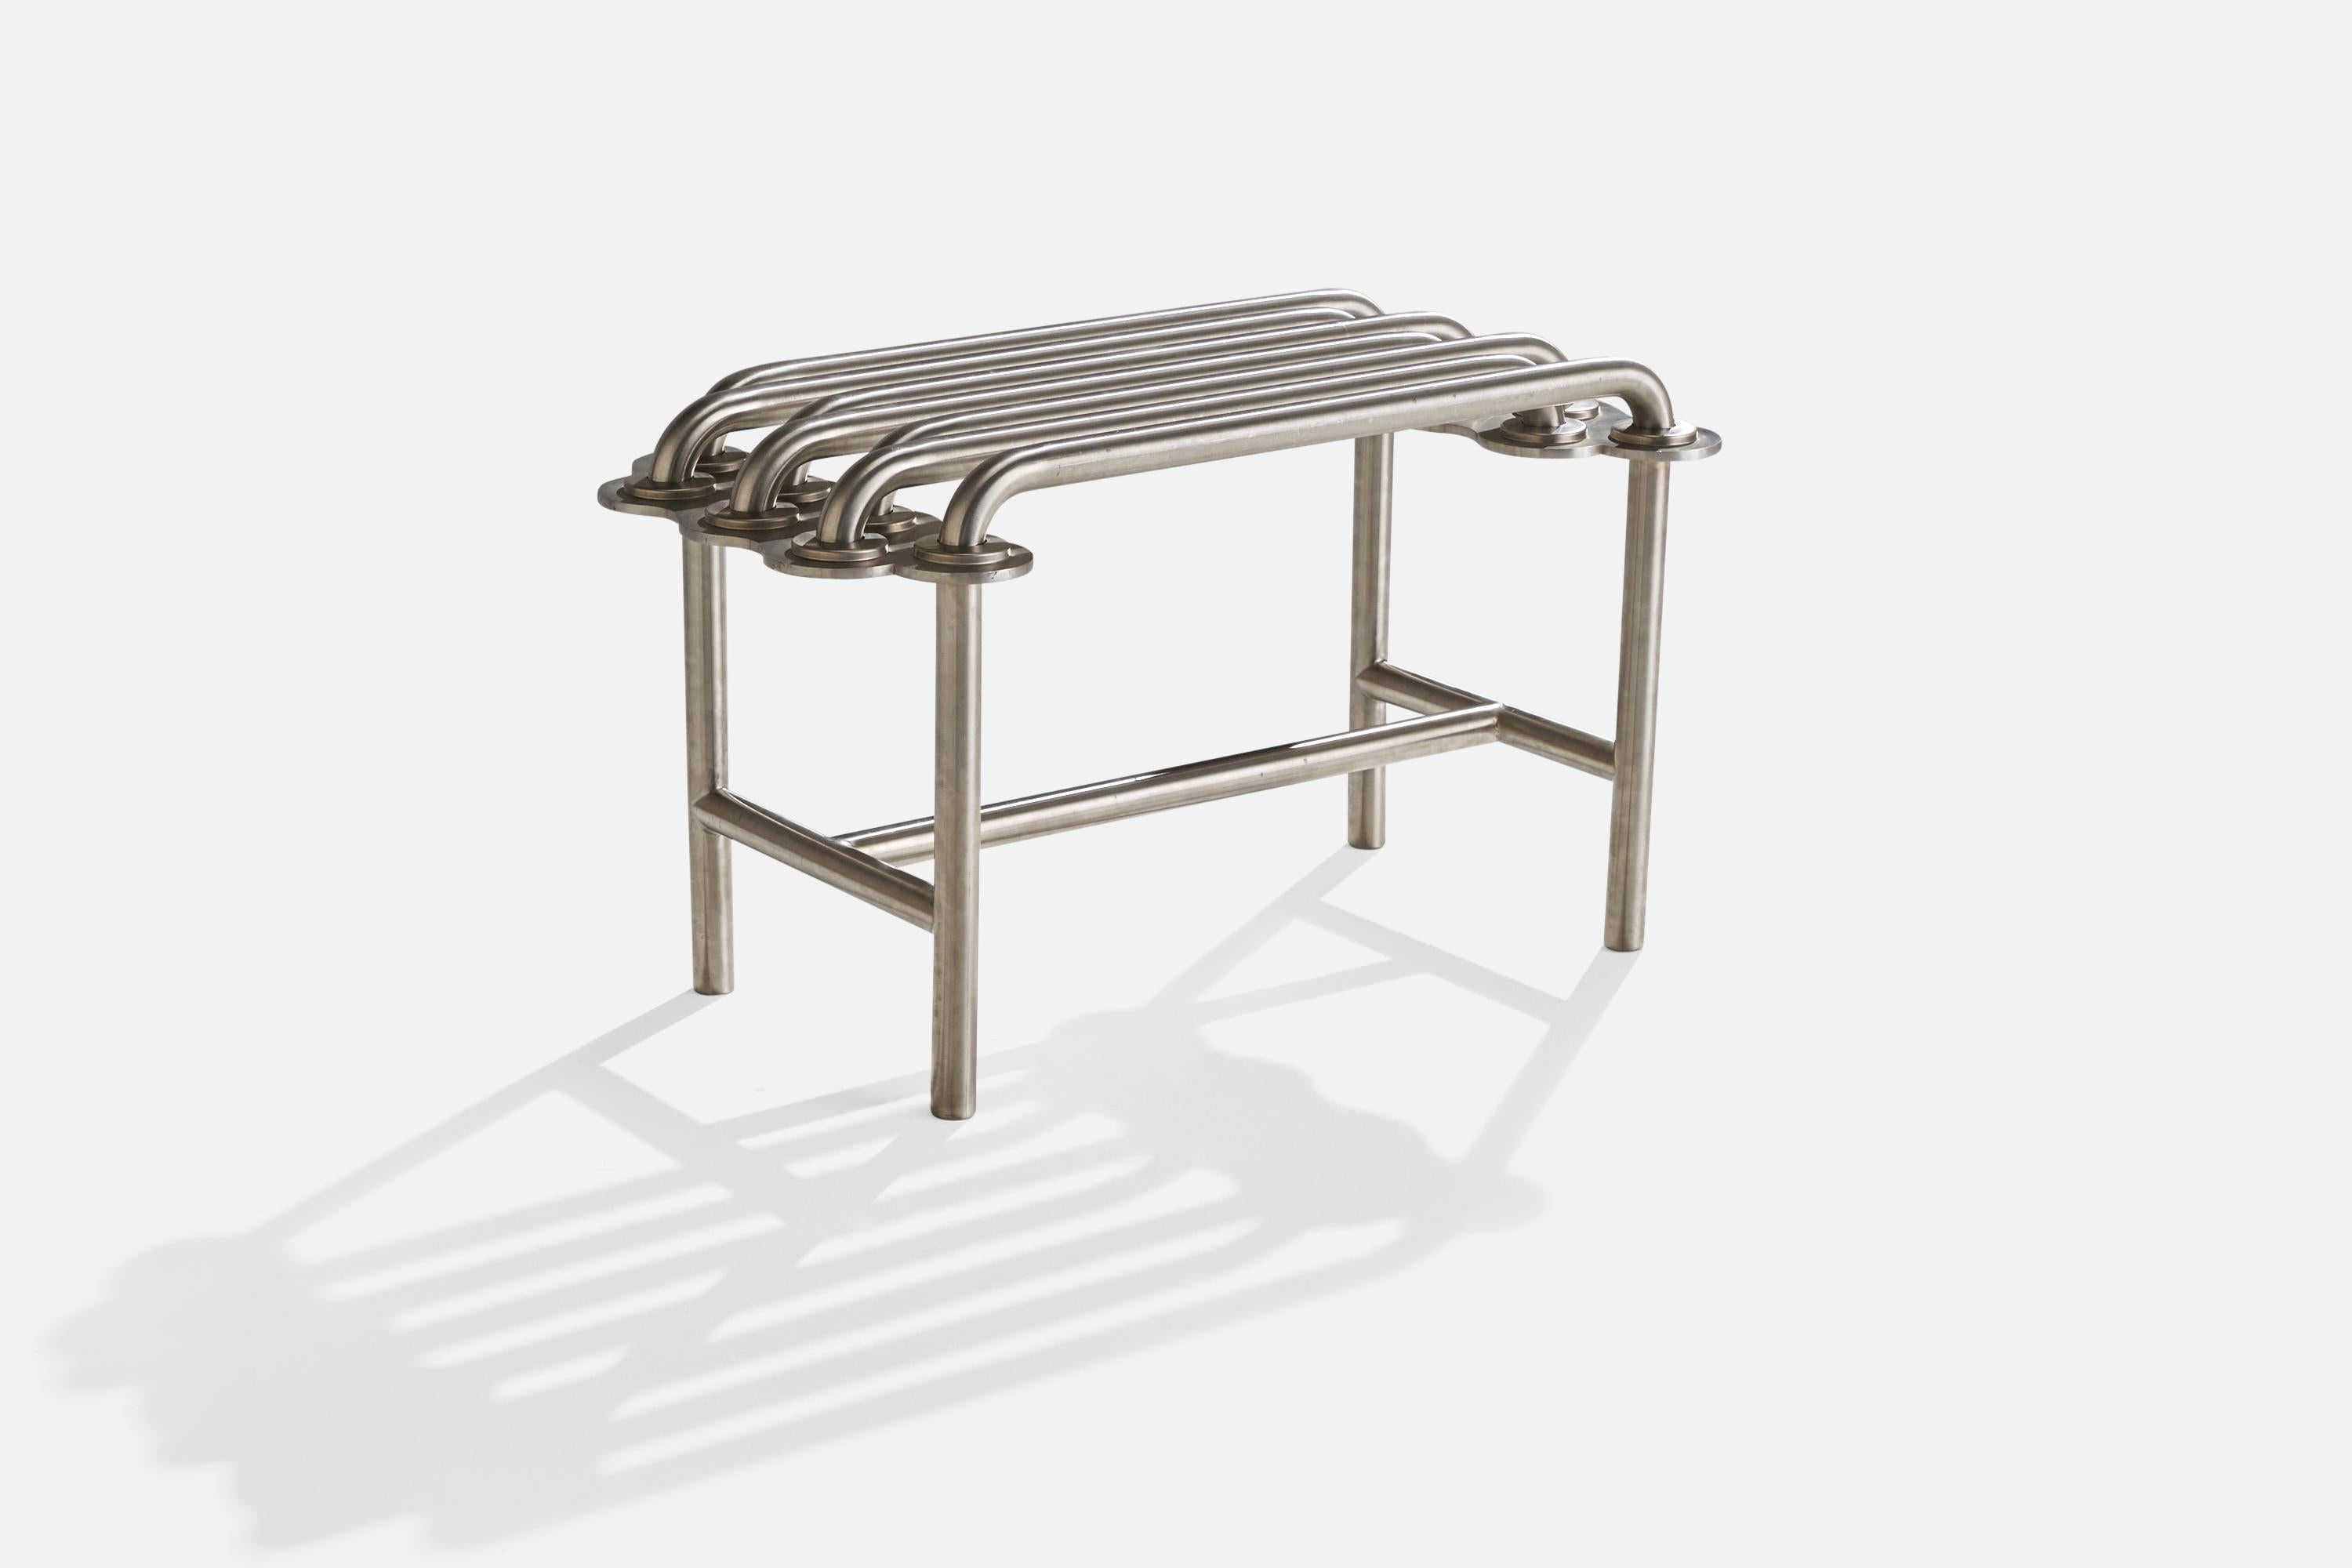 A unique stainless steel and aluminum bench designed and produced by Jim Drain, USA, 200s.

seat height 22.45 inches